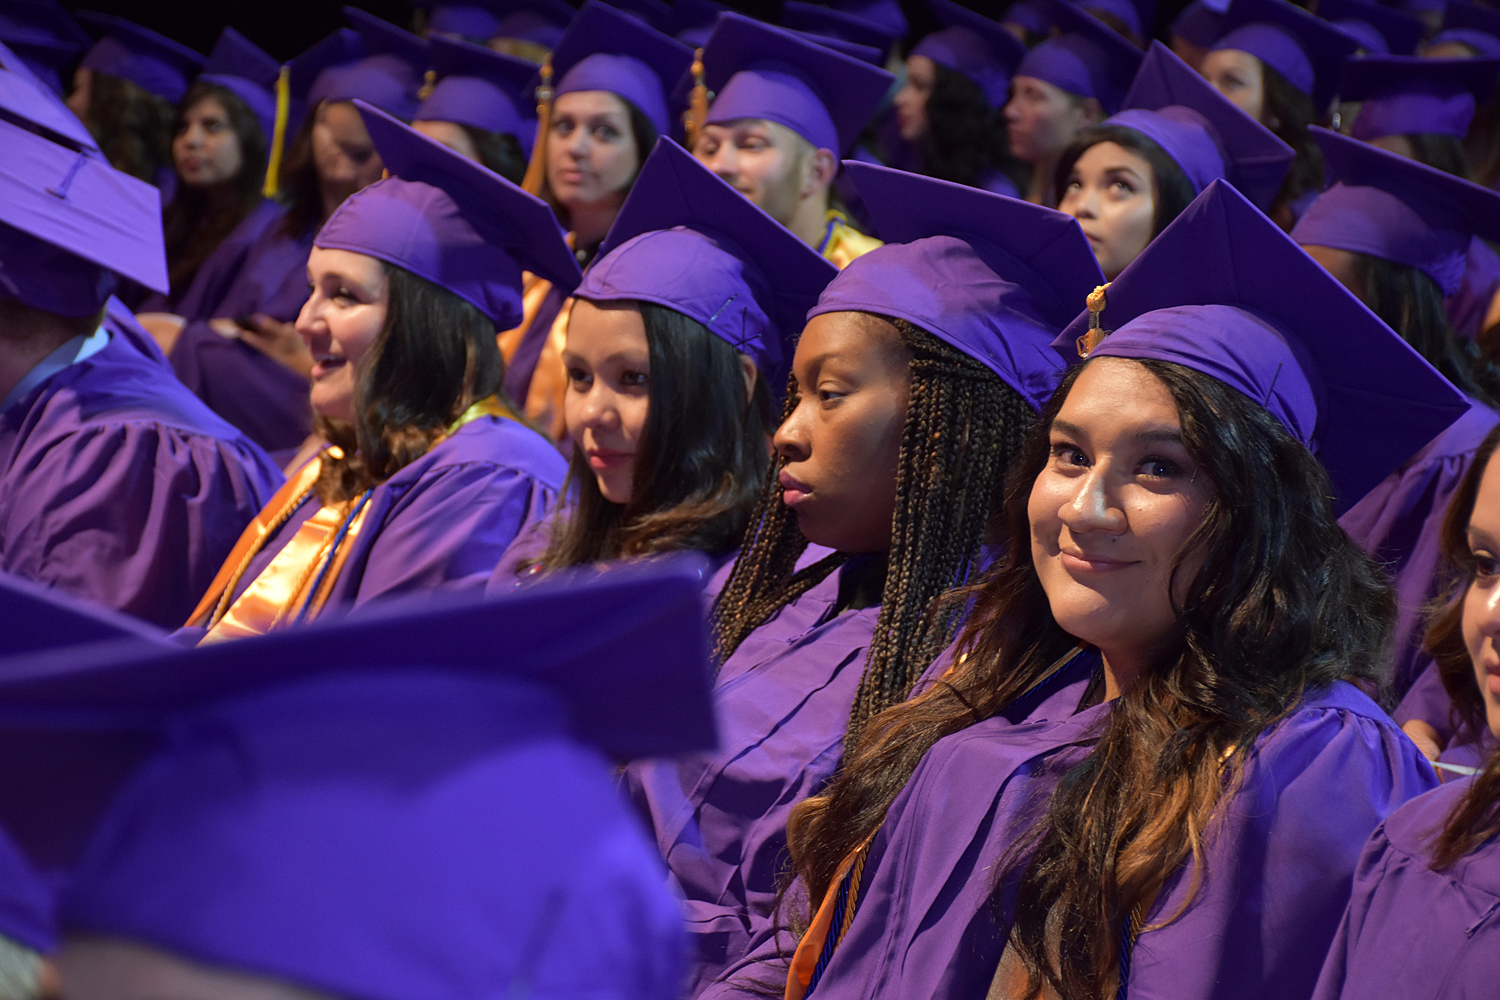 room of people with purple caps and gowns